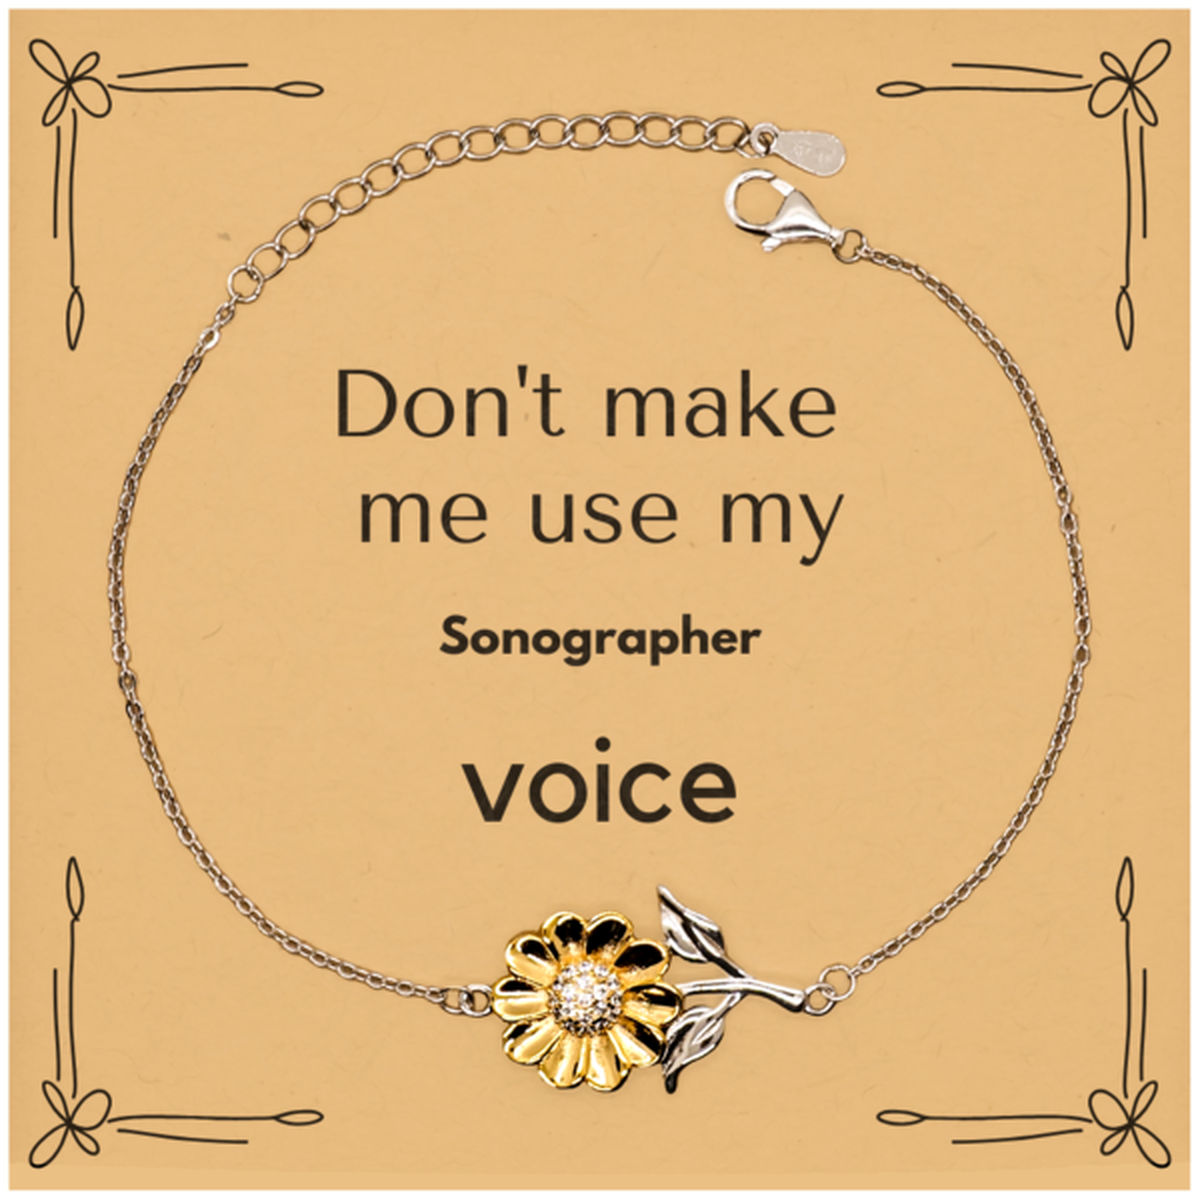 Don't make me use my Sonographer voice, Sarcasm Sonographer Card Gifts, Christmas Sonographer Sunflower Bracelet Birthday Unique Gifts For Sonographer Coworkers, Men, Women, Colleague, Friends